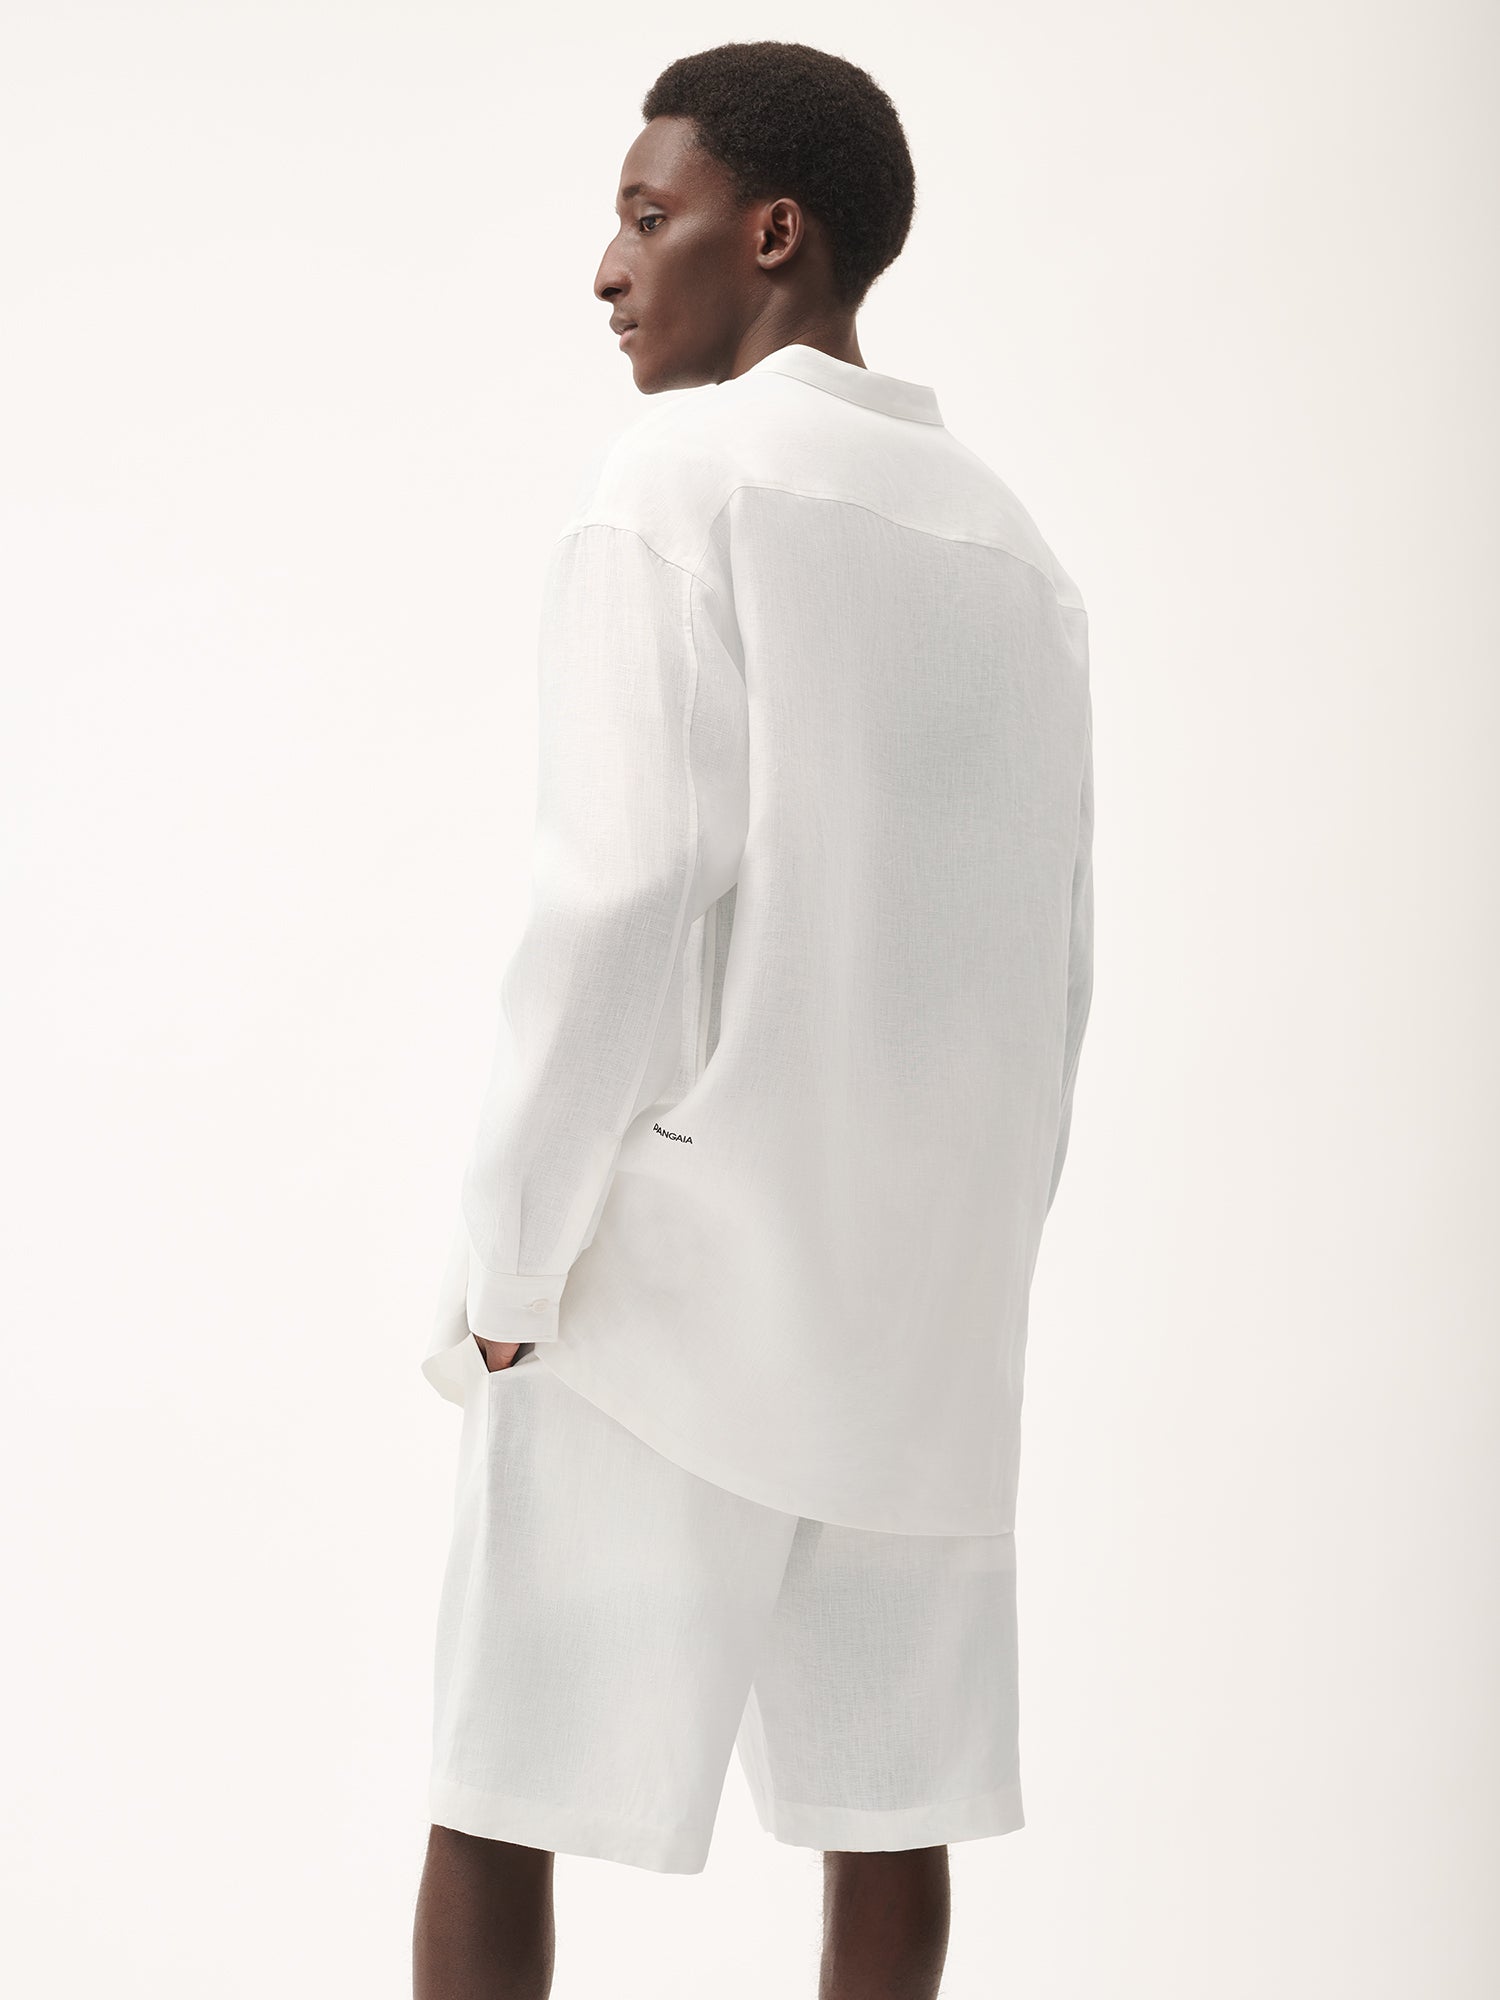 DNA_Linen_Collared_Long_Sleeve_Shirt_Off_White_male-3